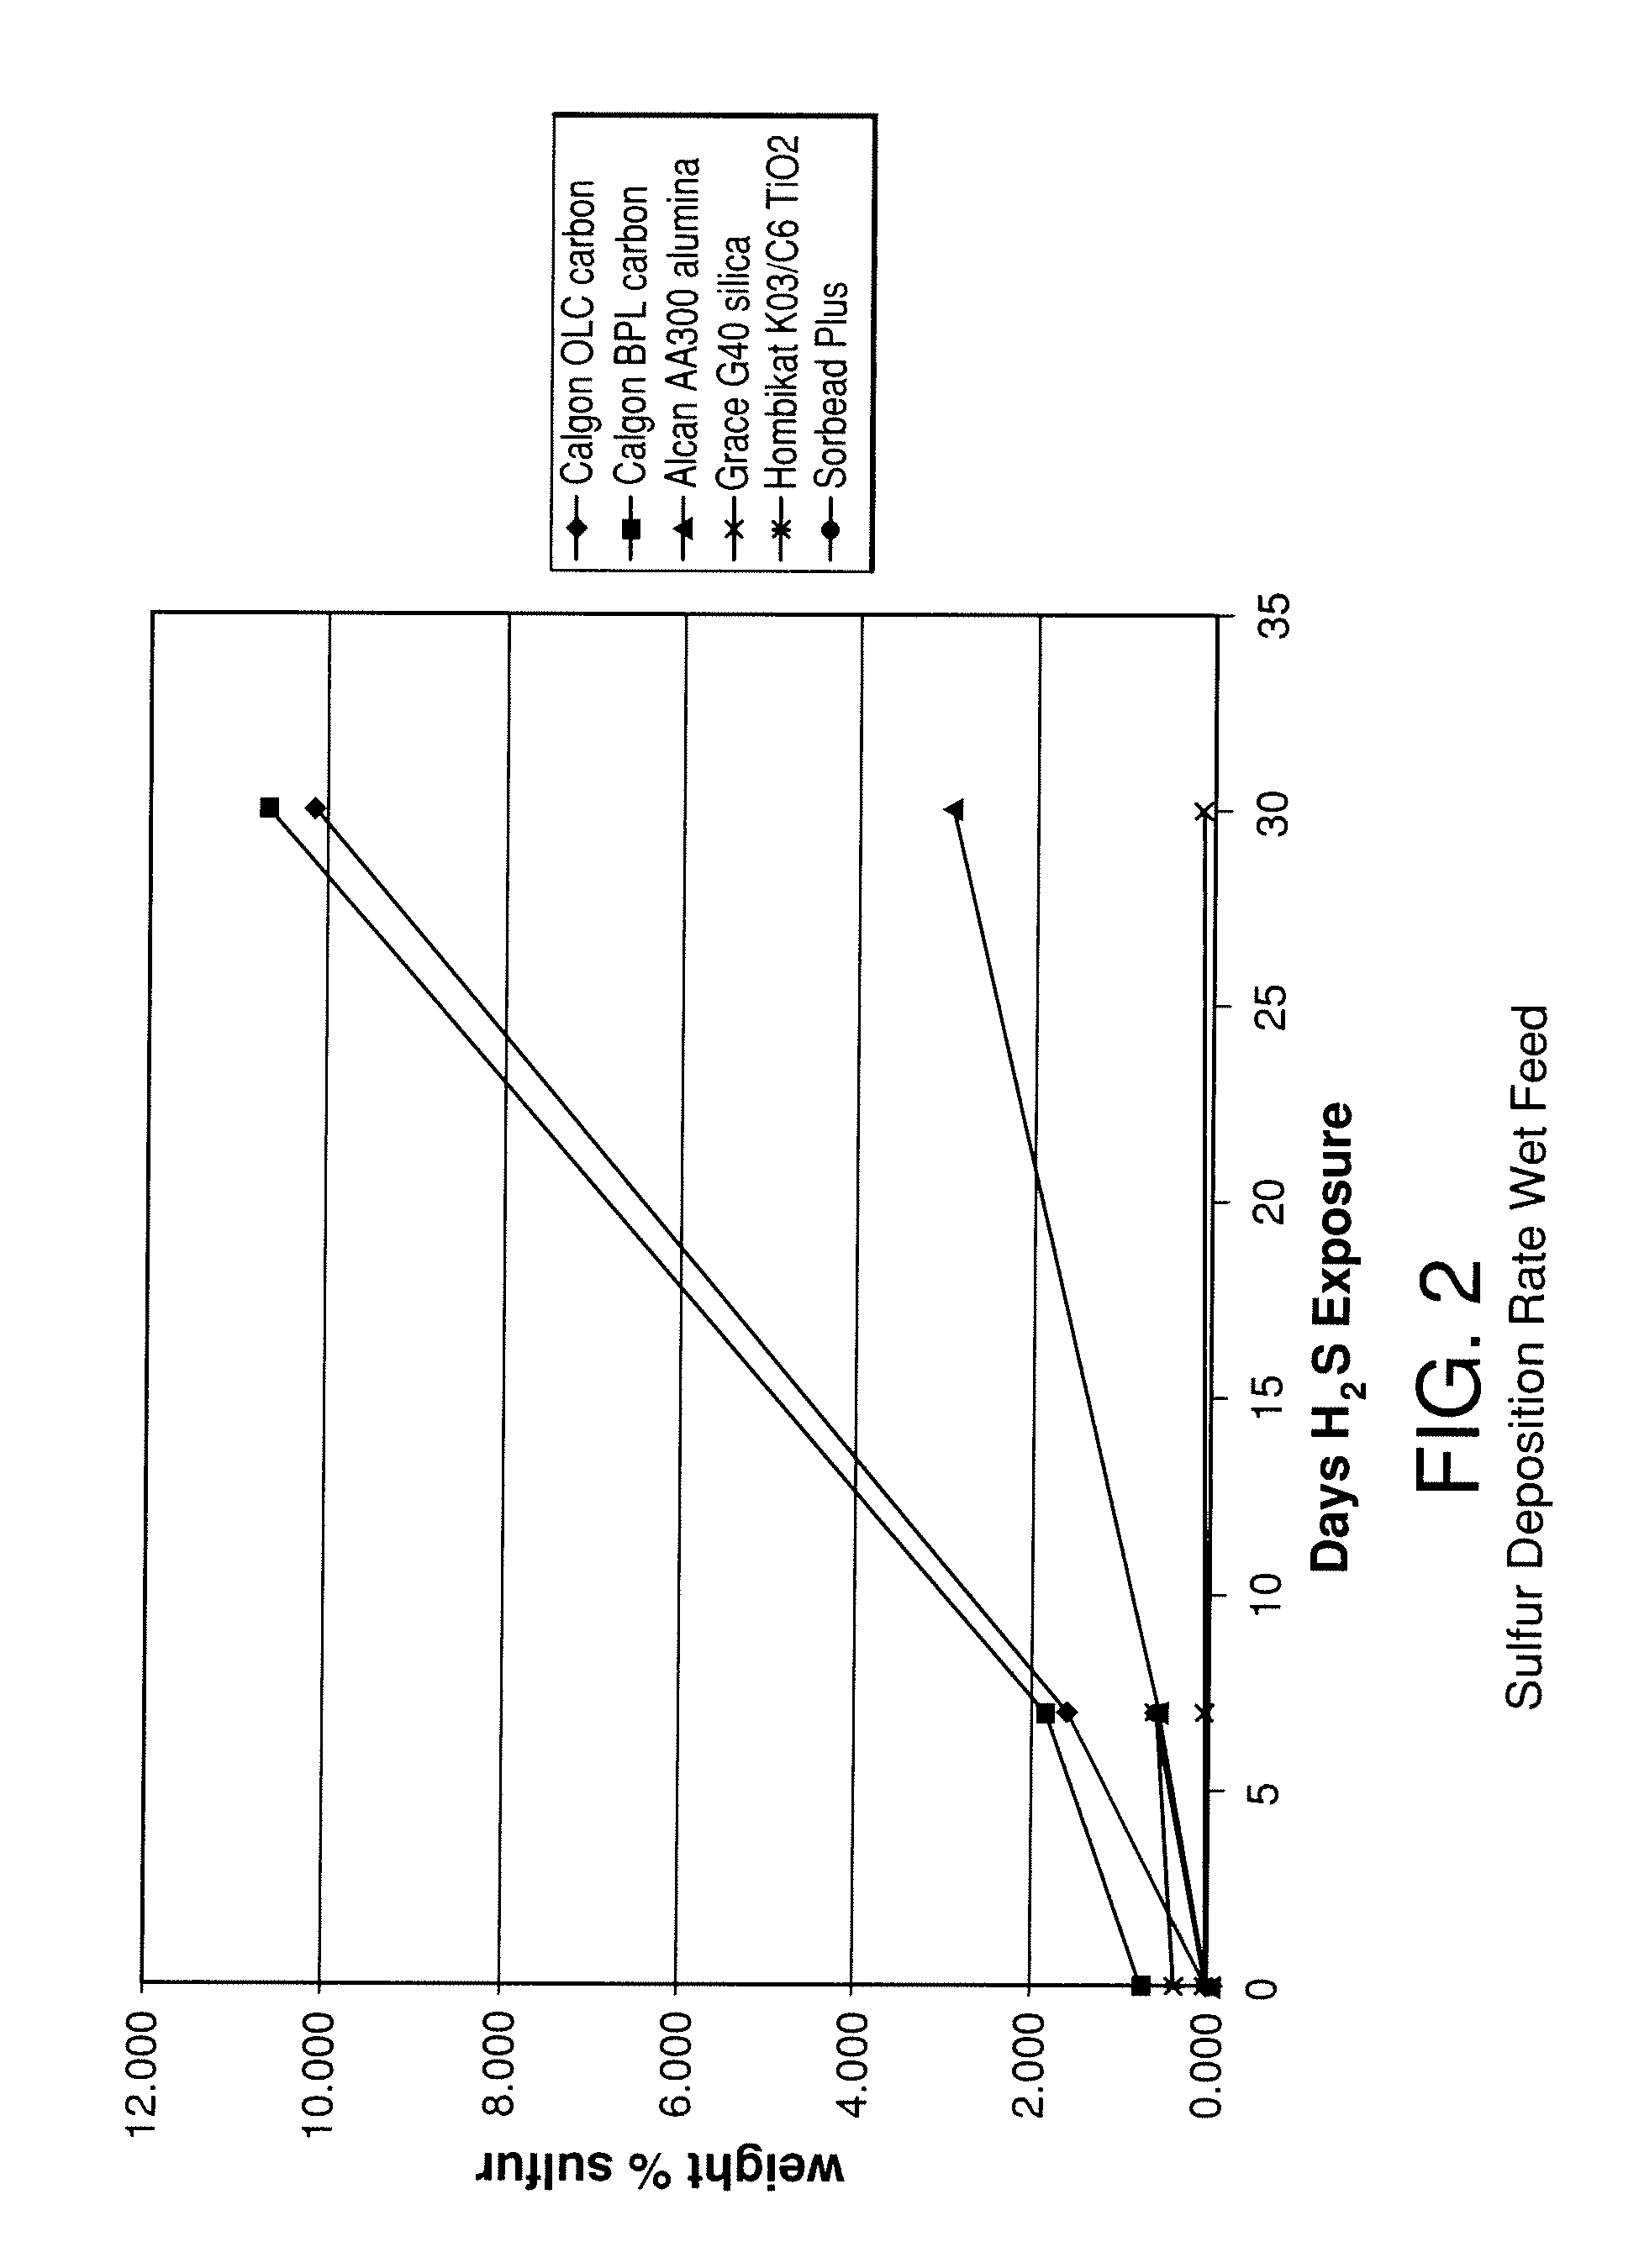 Gas Purification by Adsorption of Hydrogen Sulfide